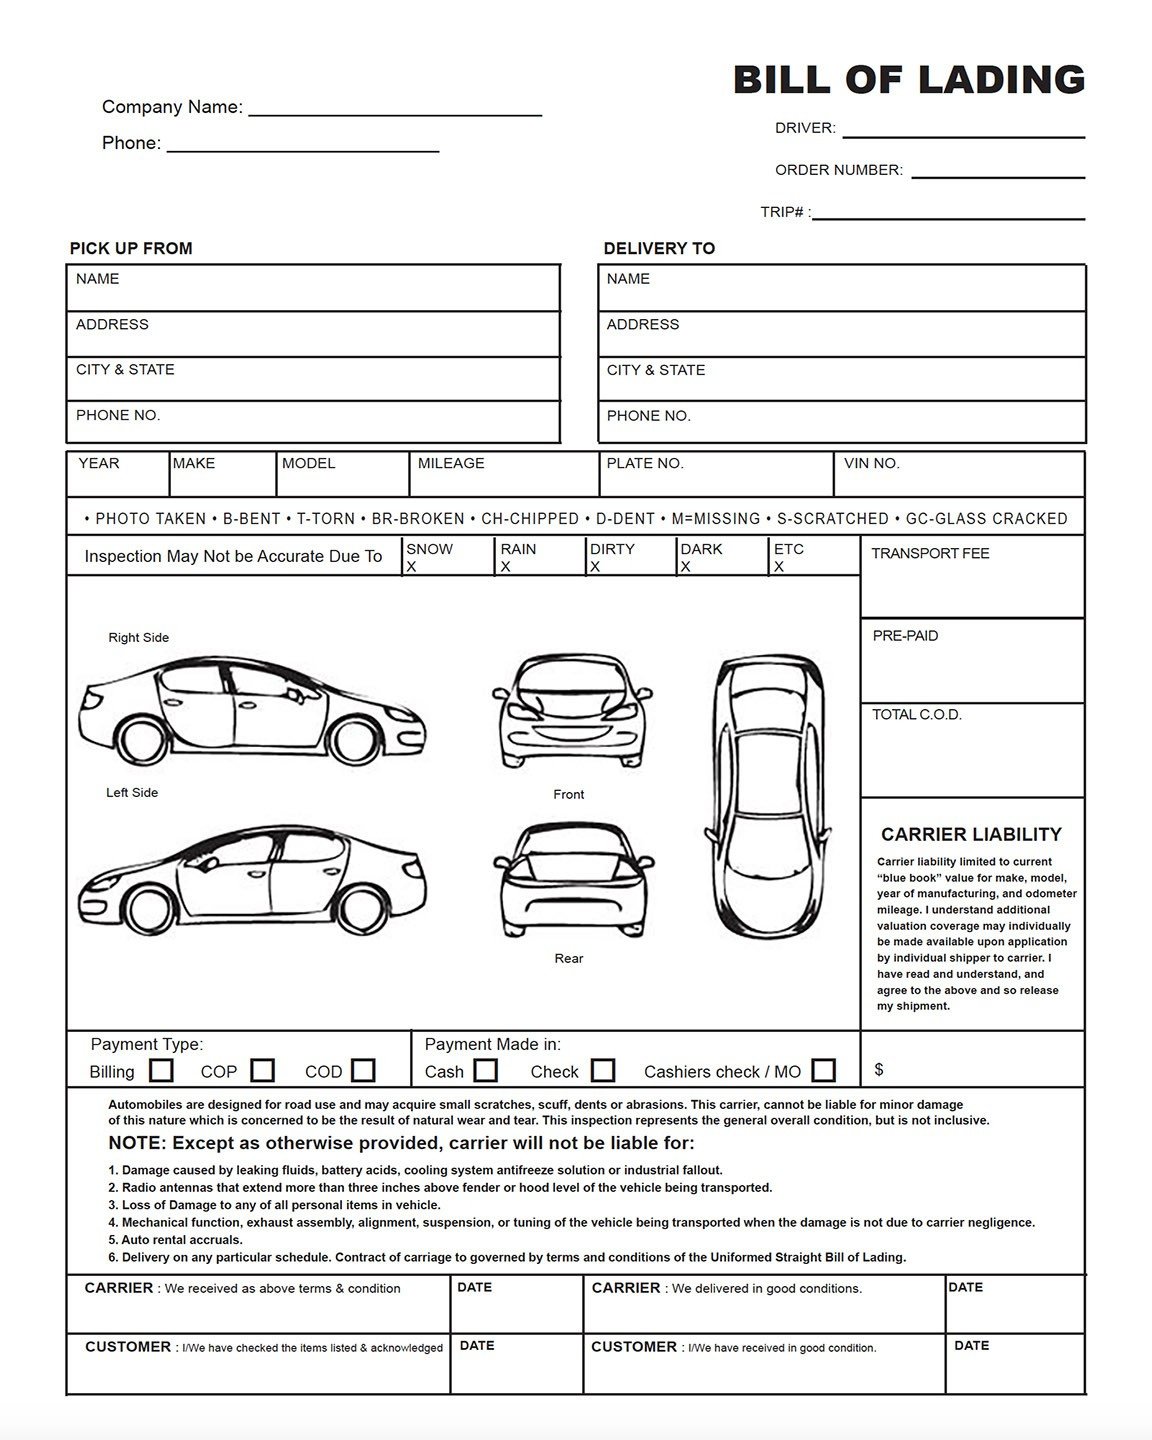 Vehicle Condition Report Template Why You Should Not Go To Regarding Truck Condition Report Template